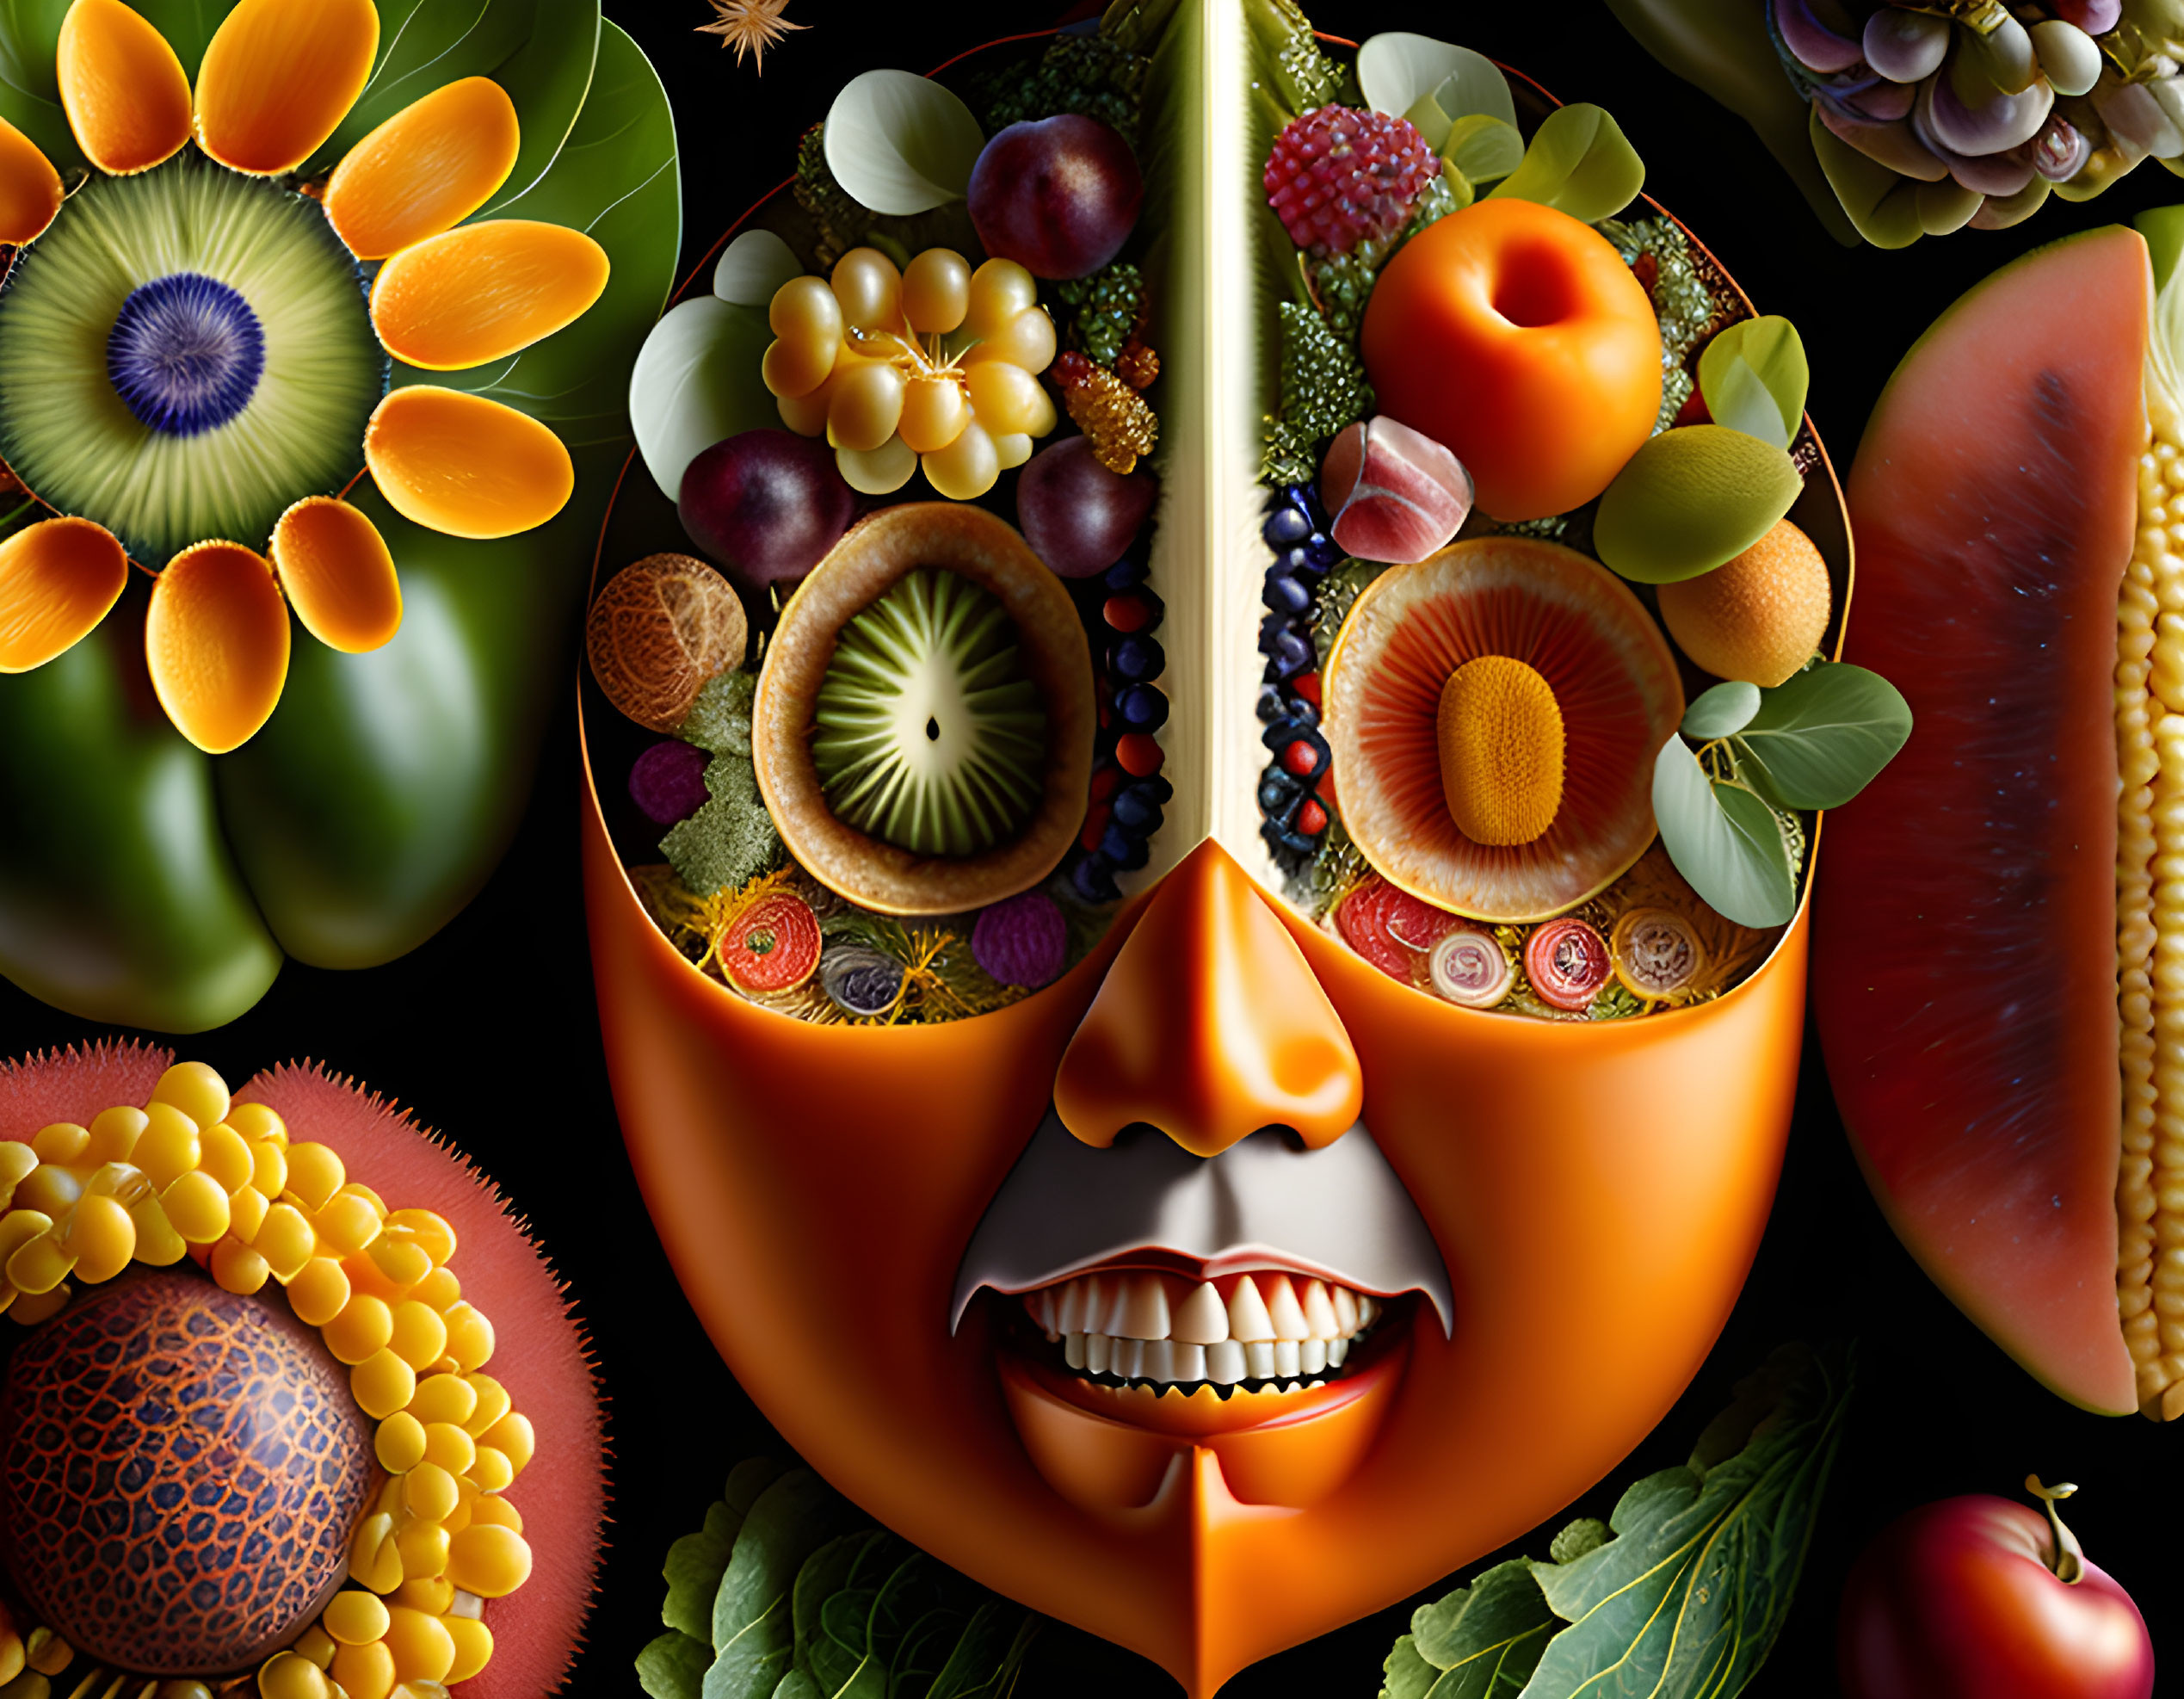 Colorful Fruit Face Artwork with Floral Elements on Dark Background